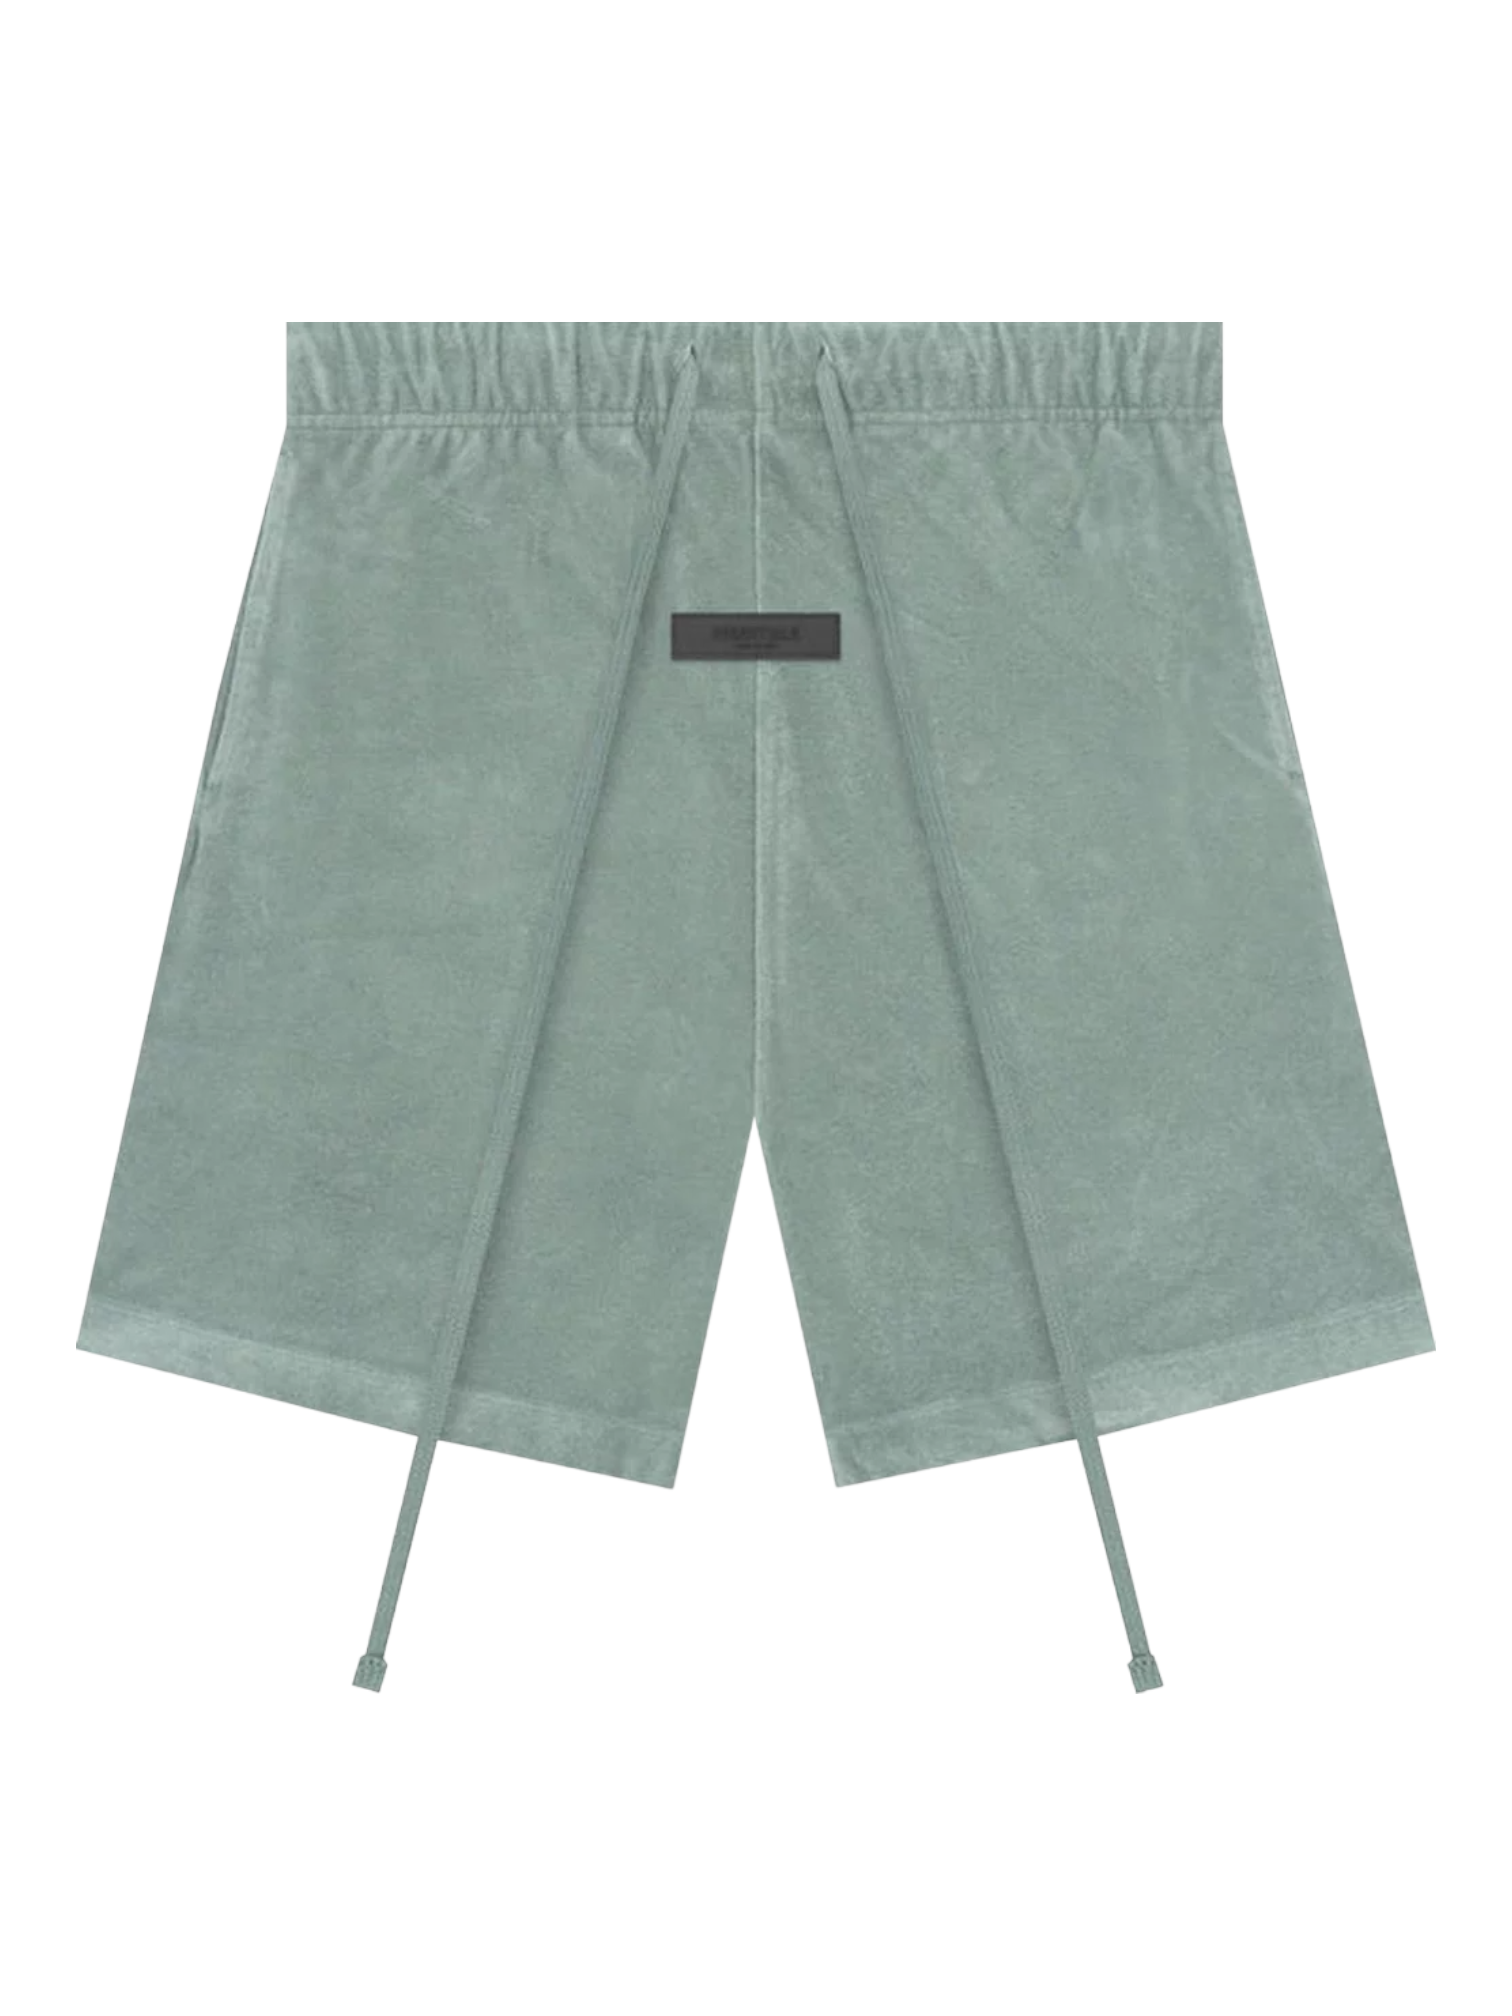 Essentials Fear of God Sycamore Terry Cloth Shorts SS23  — Genuine Design Luxury Consignment Calgary, Canada New & Pre-Owned Authentic Clothing, Shoes, Accessories.